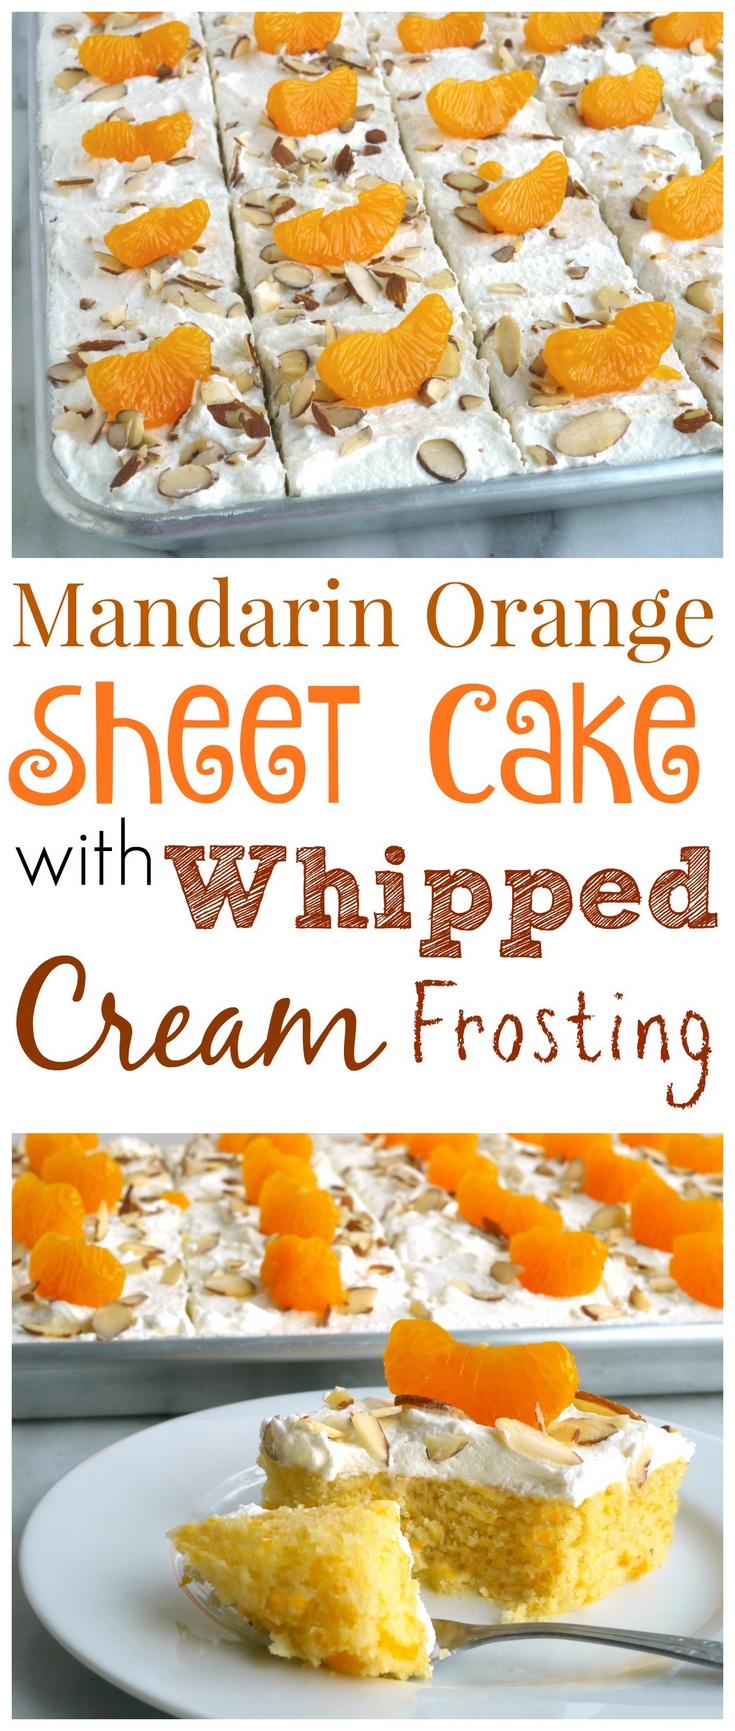 VIDEO + RECIPE: This Mandarin Orange Sheet Cake with Whipped Cream Frosting has the most delicious and satisfying texture you'll ever want to experience in a cake from NoblePig.com. #noblepig #cake #mandarinorange #sheetcake via @cmpollak1